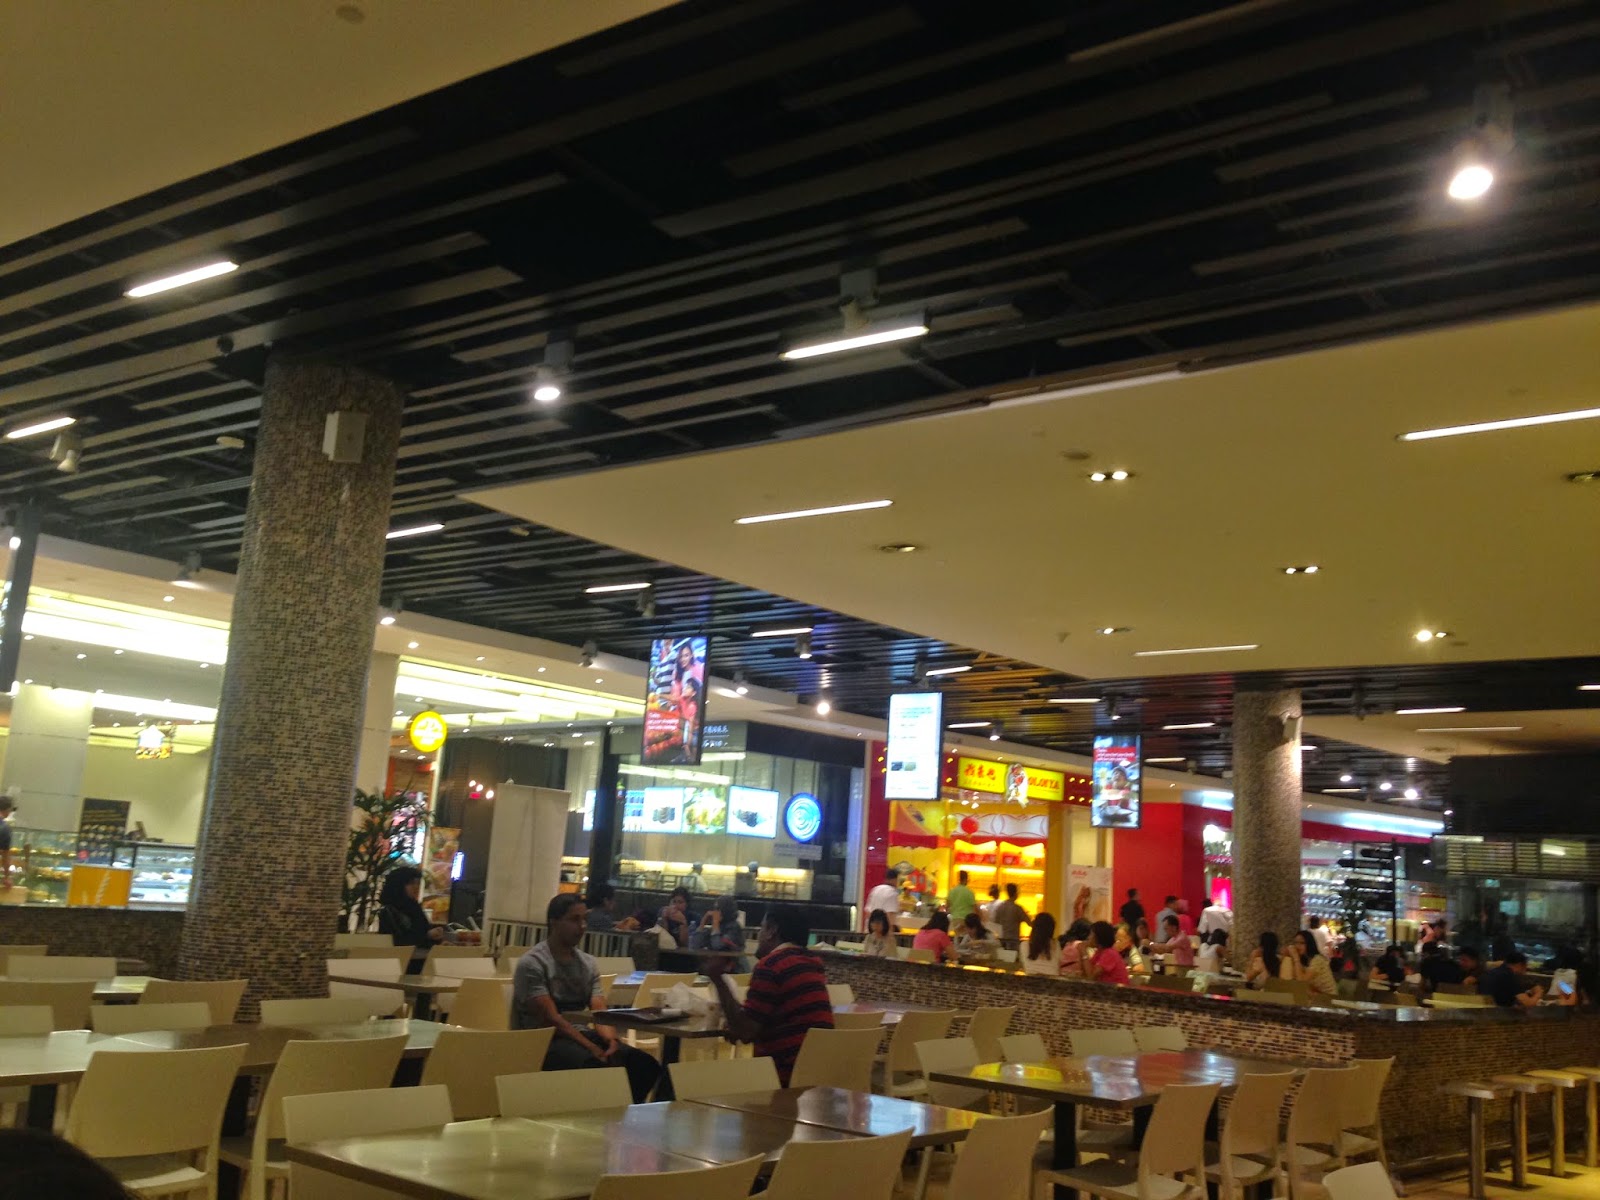 Pavilion Kl Food Court : Discover a Taste Adventure with the New Food